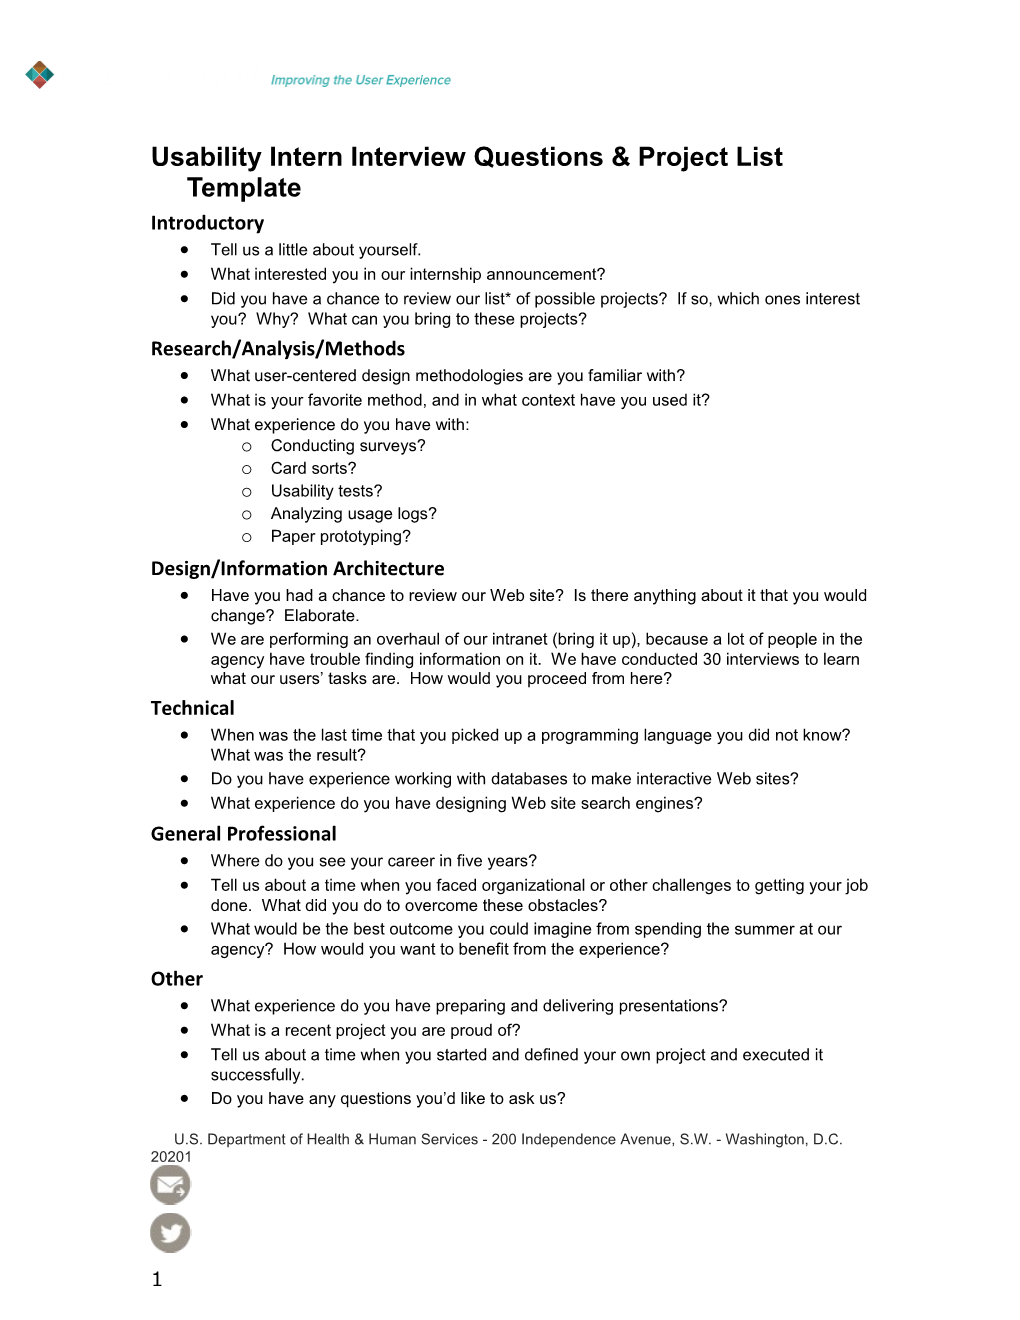 Usability Intern Interview Questions & Project List Template